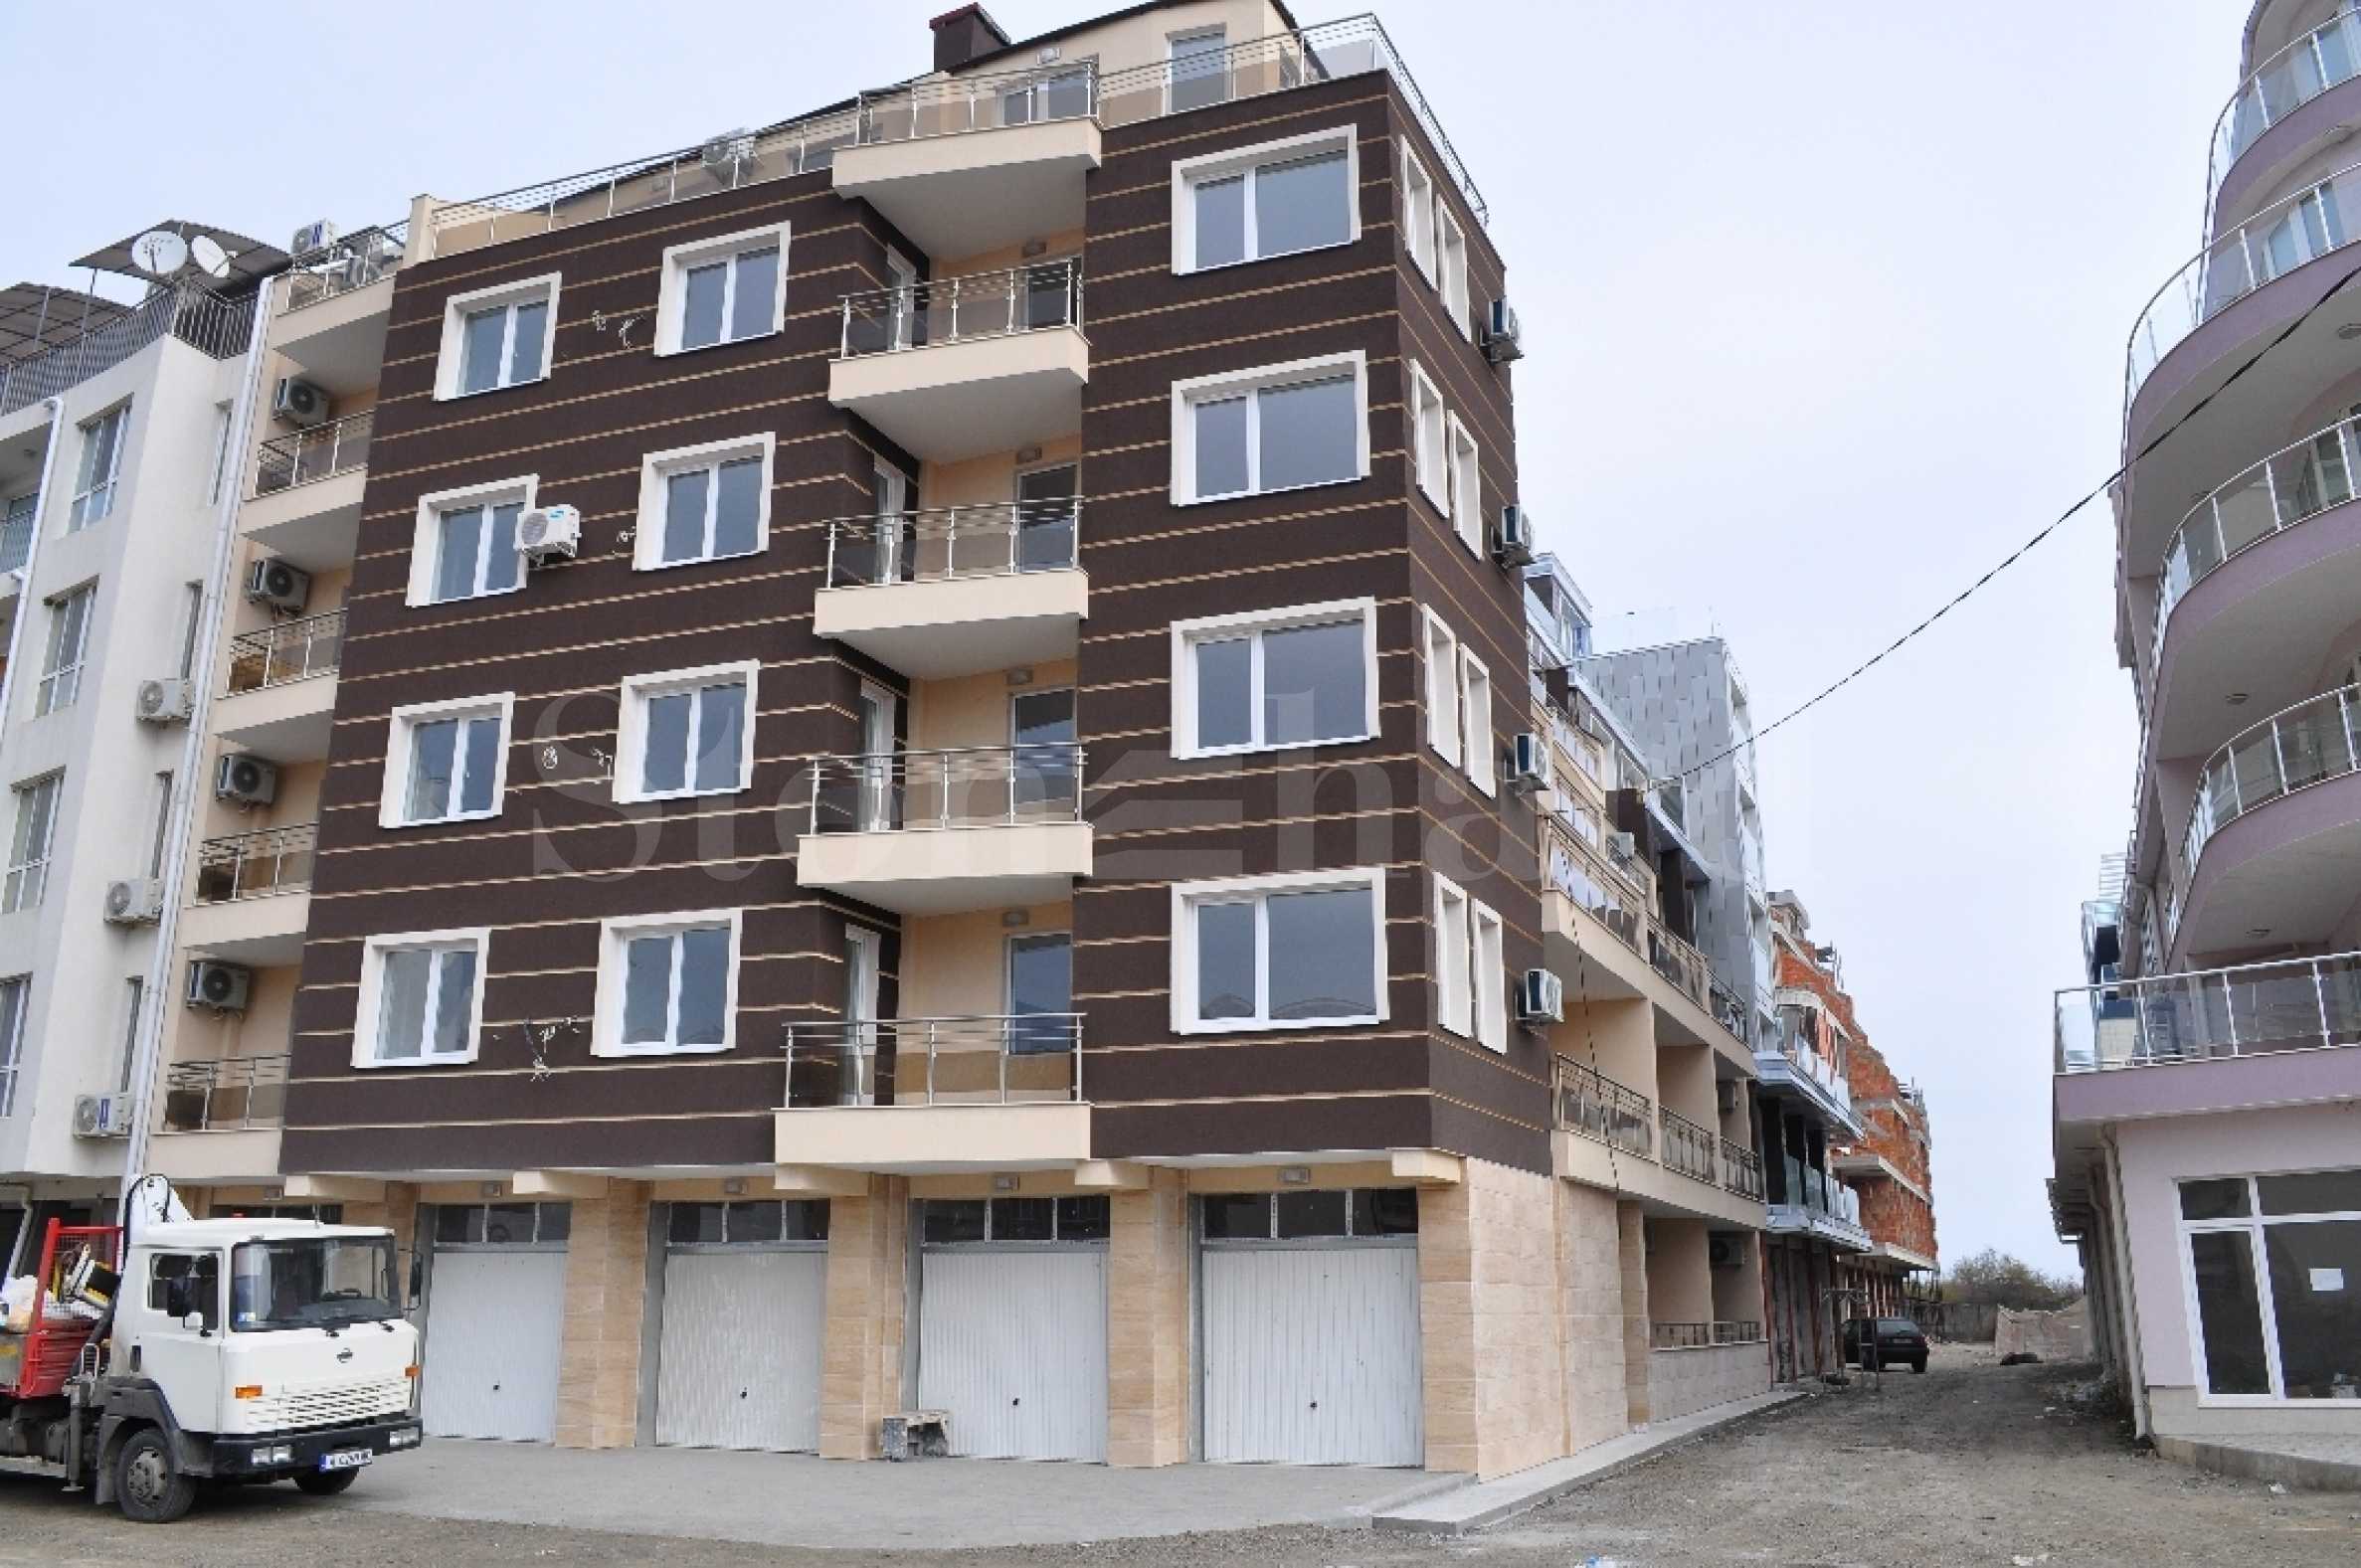 Turn-key apartments in an operational building in Pomorie, Bulgaria2 - Stonehard